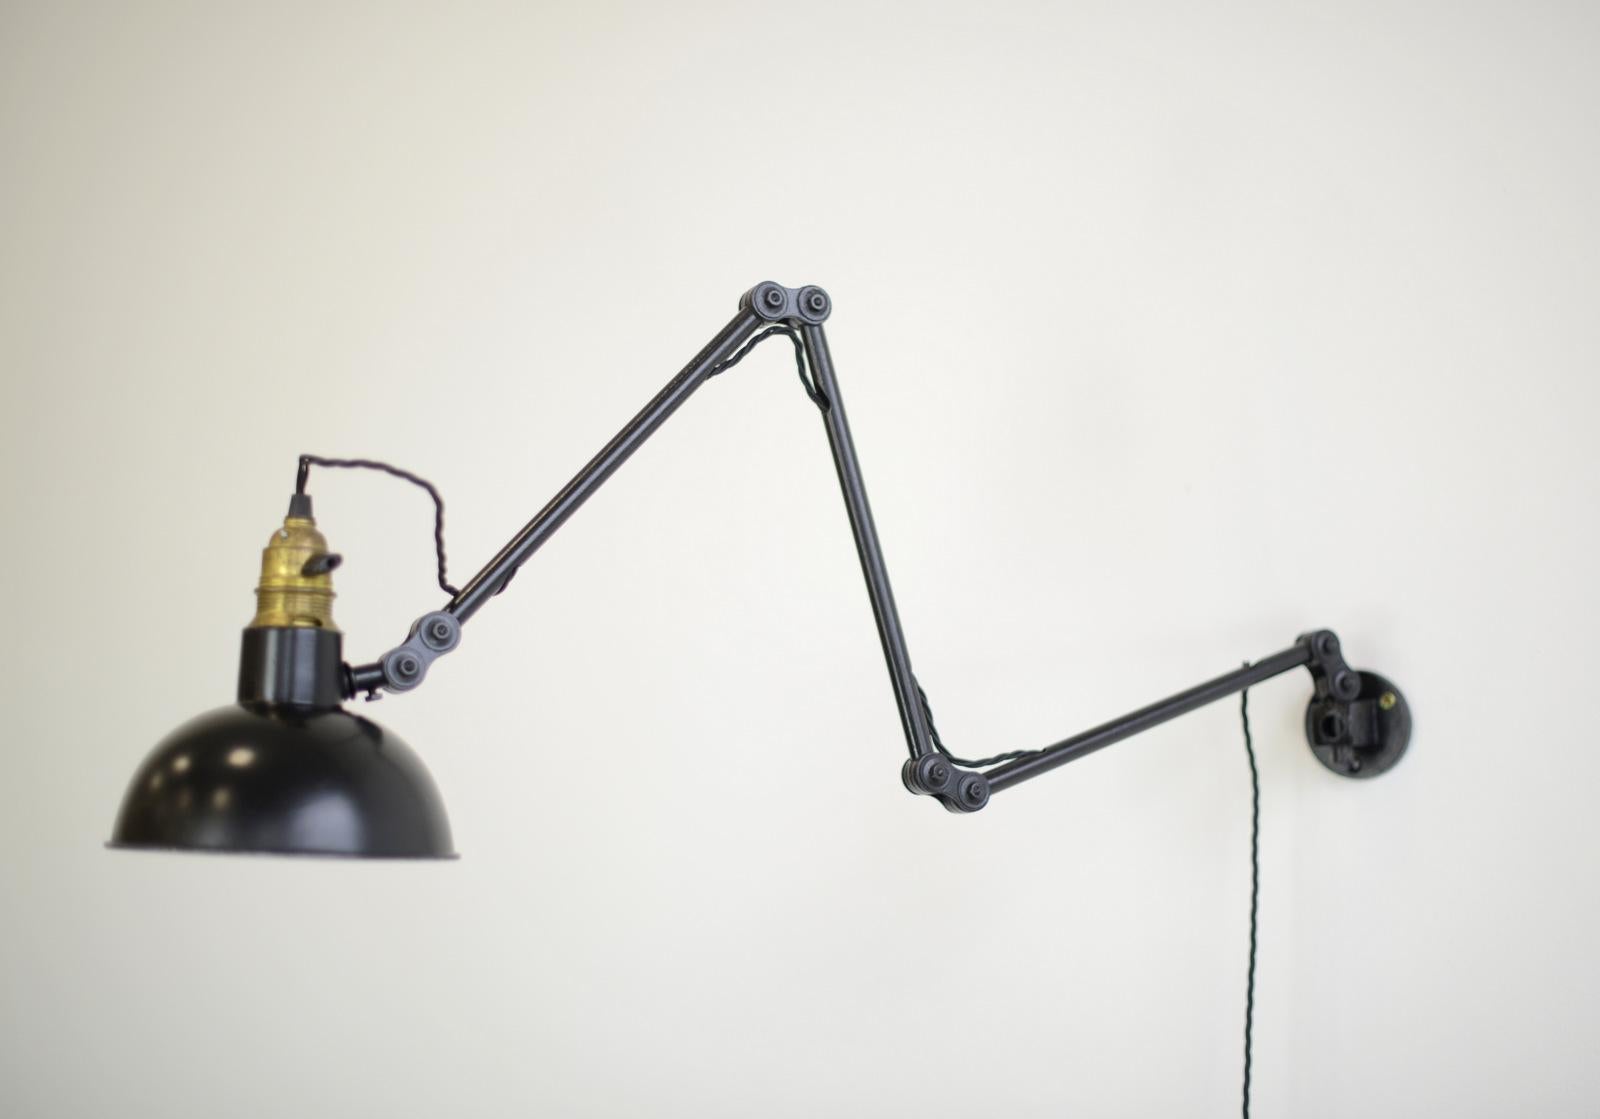 Wall mounted German task lamp, circa 1940s

- Articulated arms
- Aluminium shade
- Original switch on the head of the lamp
- German, 1940s
- Shade measures 18cm wide
- Extends up to 100cm from the wall

Condition report

Fully re wired